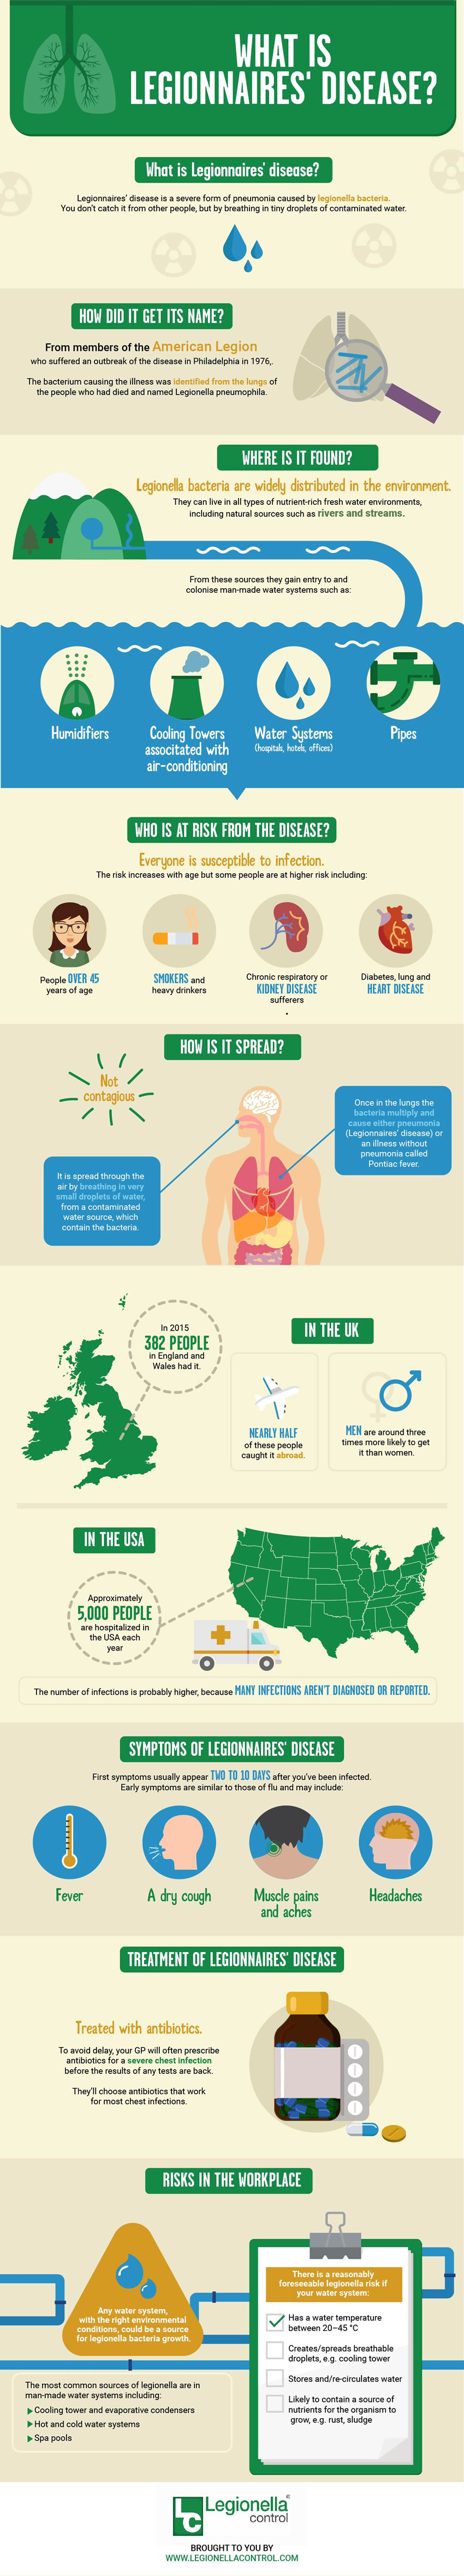 What is Legionnaires disease infographic